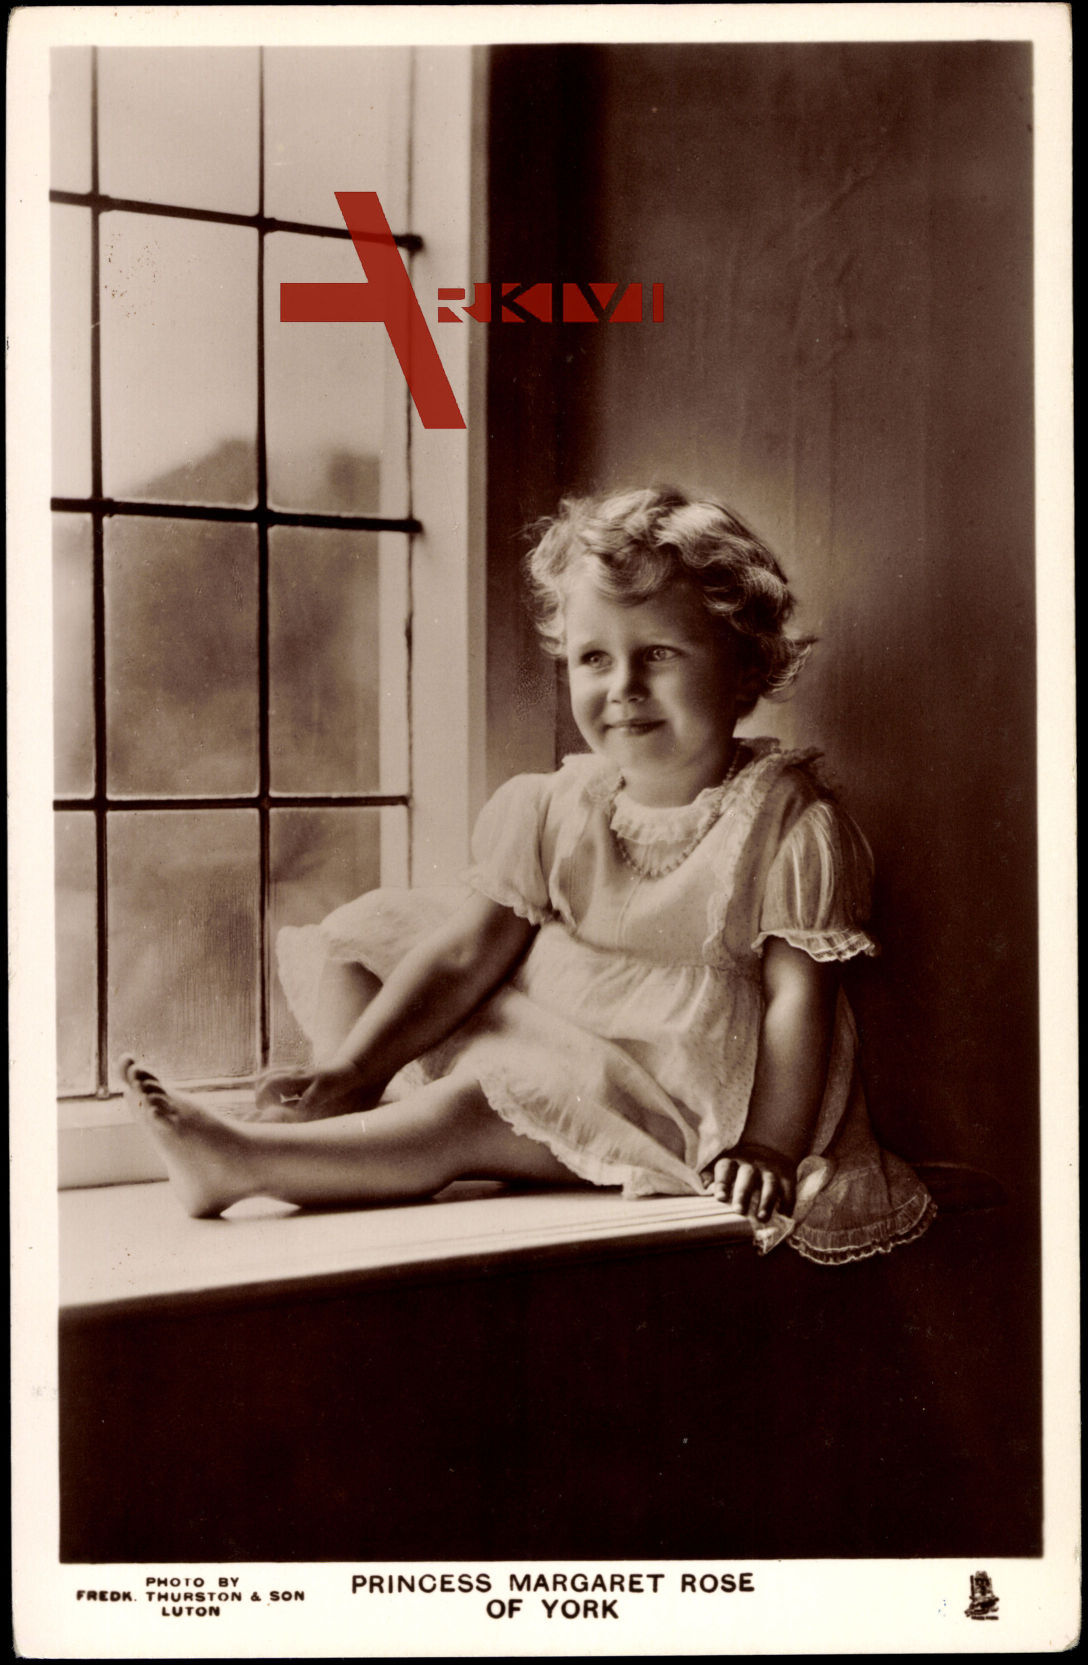 Princess Margaret Rose of York as a Child by a window